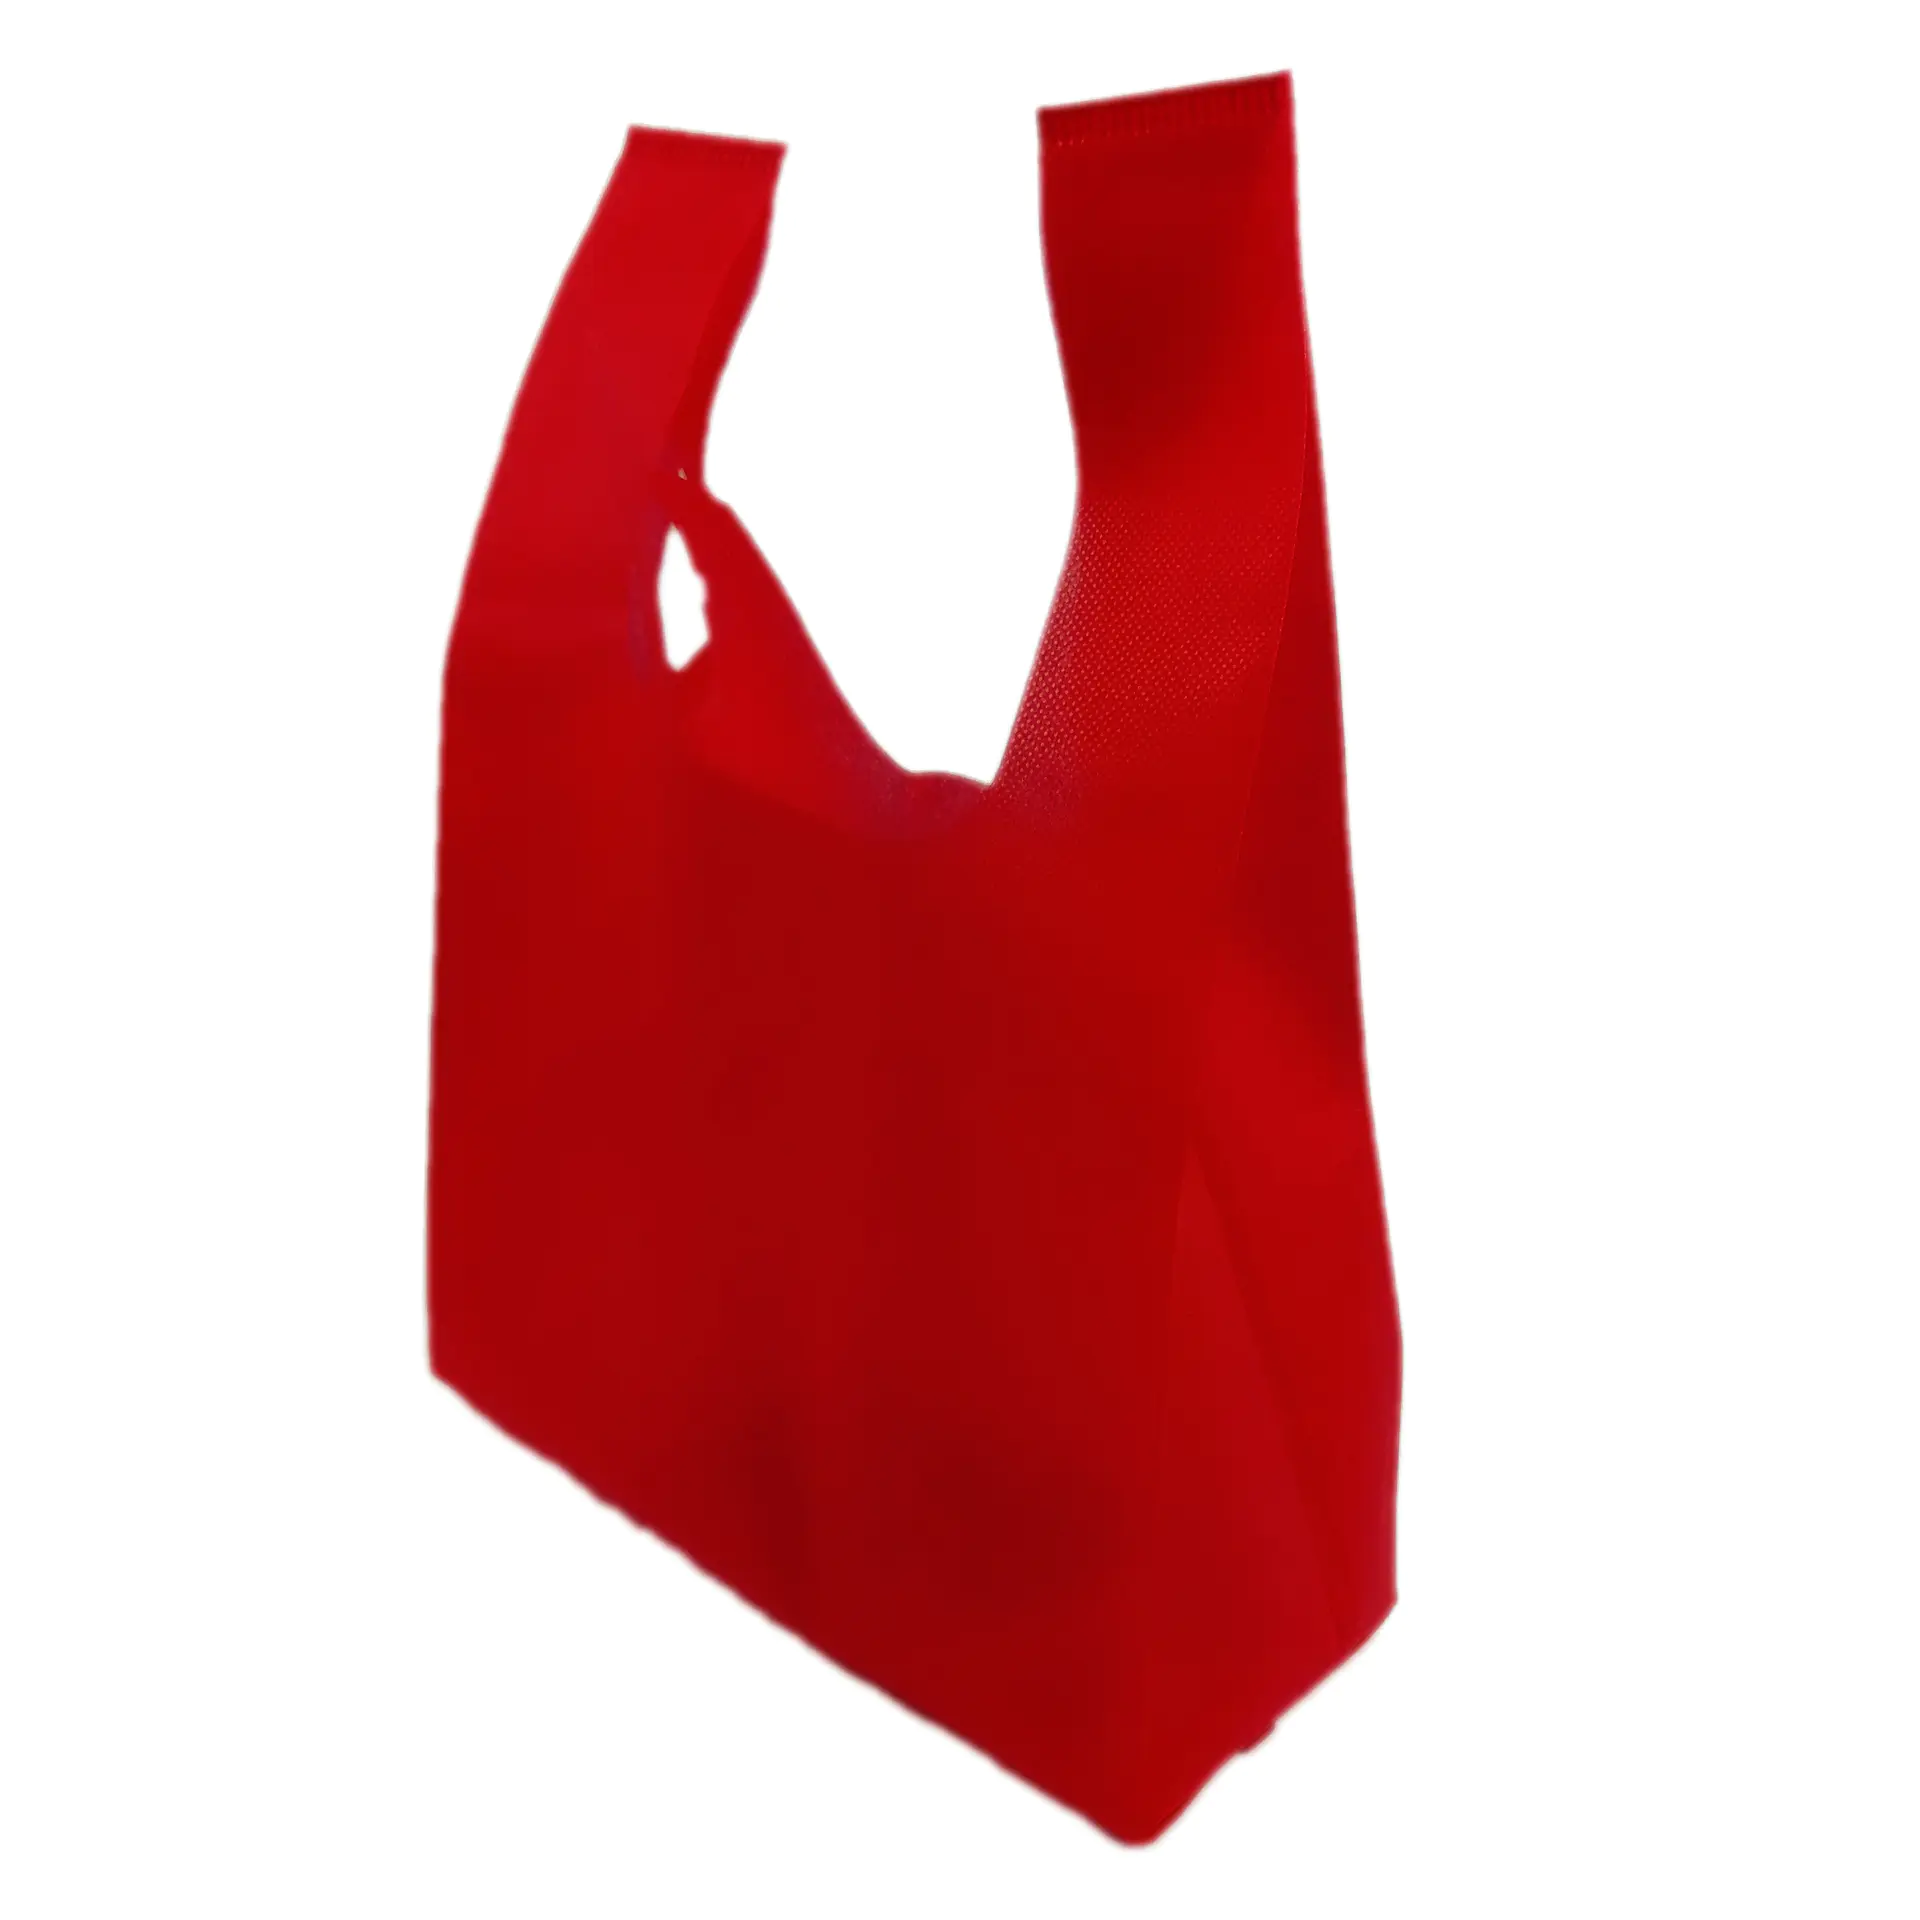 Colorful T Shirt Nonwoven Bag For Food Take Out Carry Away with Handle